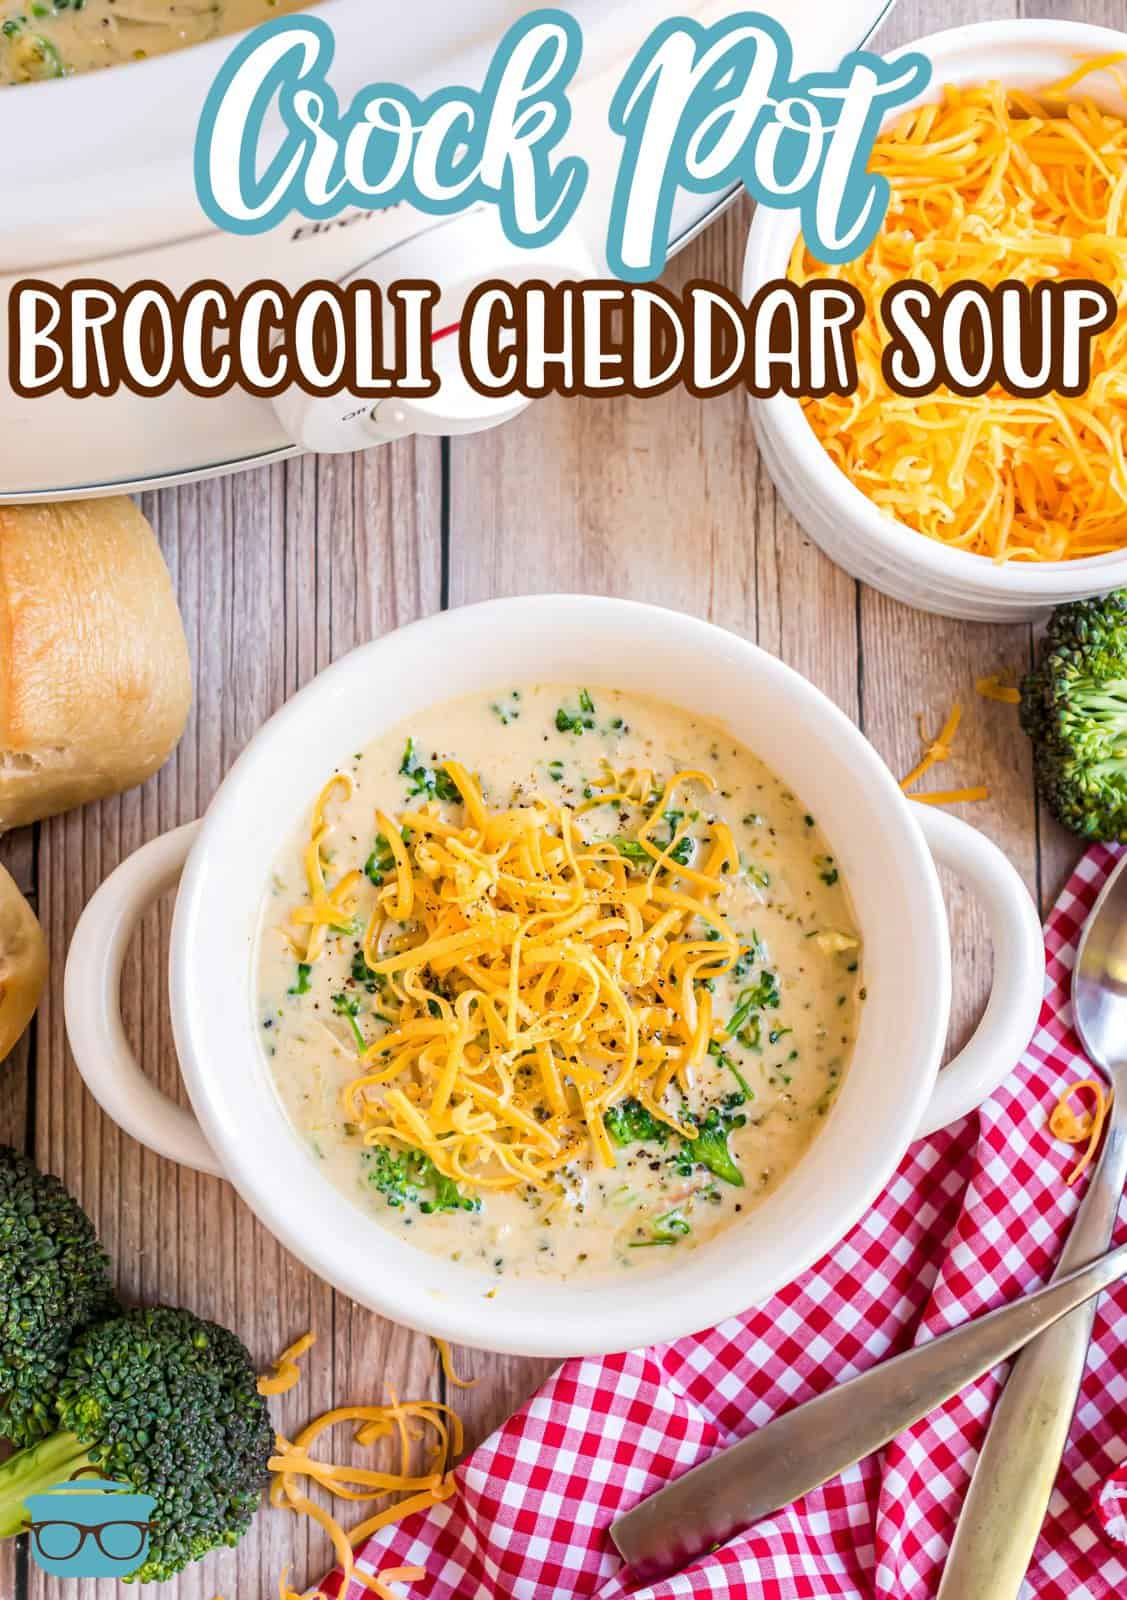 A large bowl of Broccoli Cheddar Soup made in the crock pot.